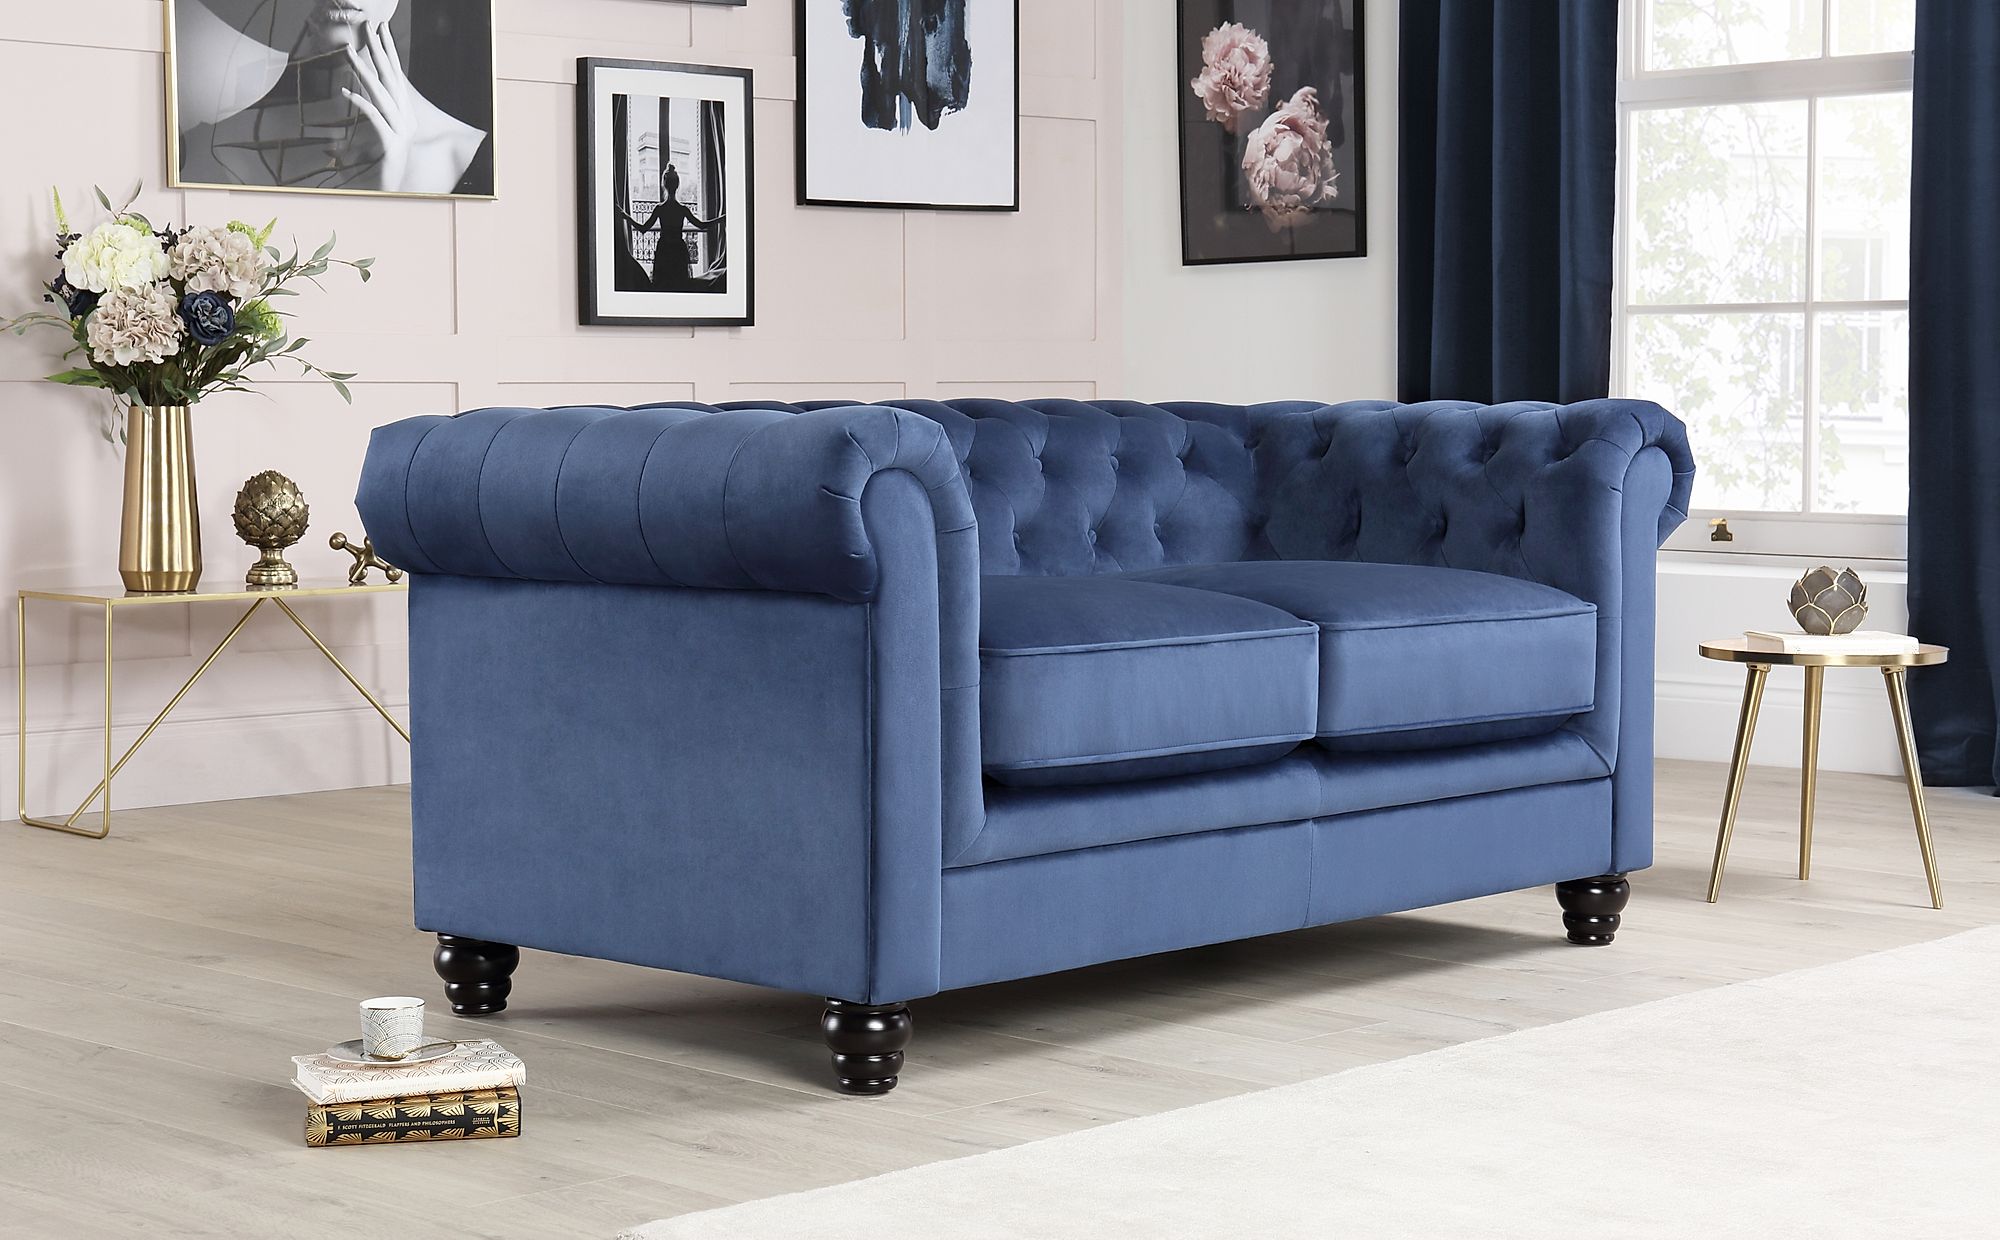 69 Striking blue chesterfield sofa bed For Every Budget